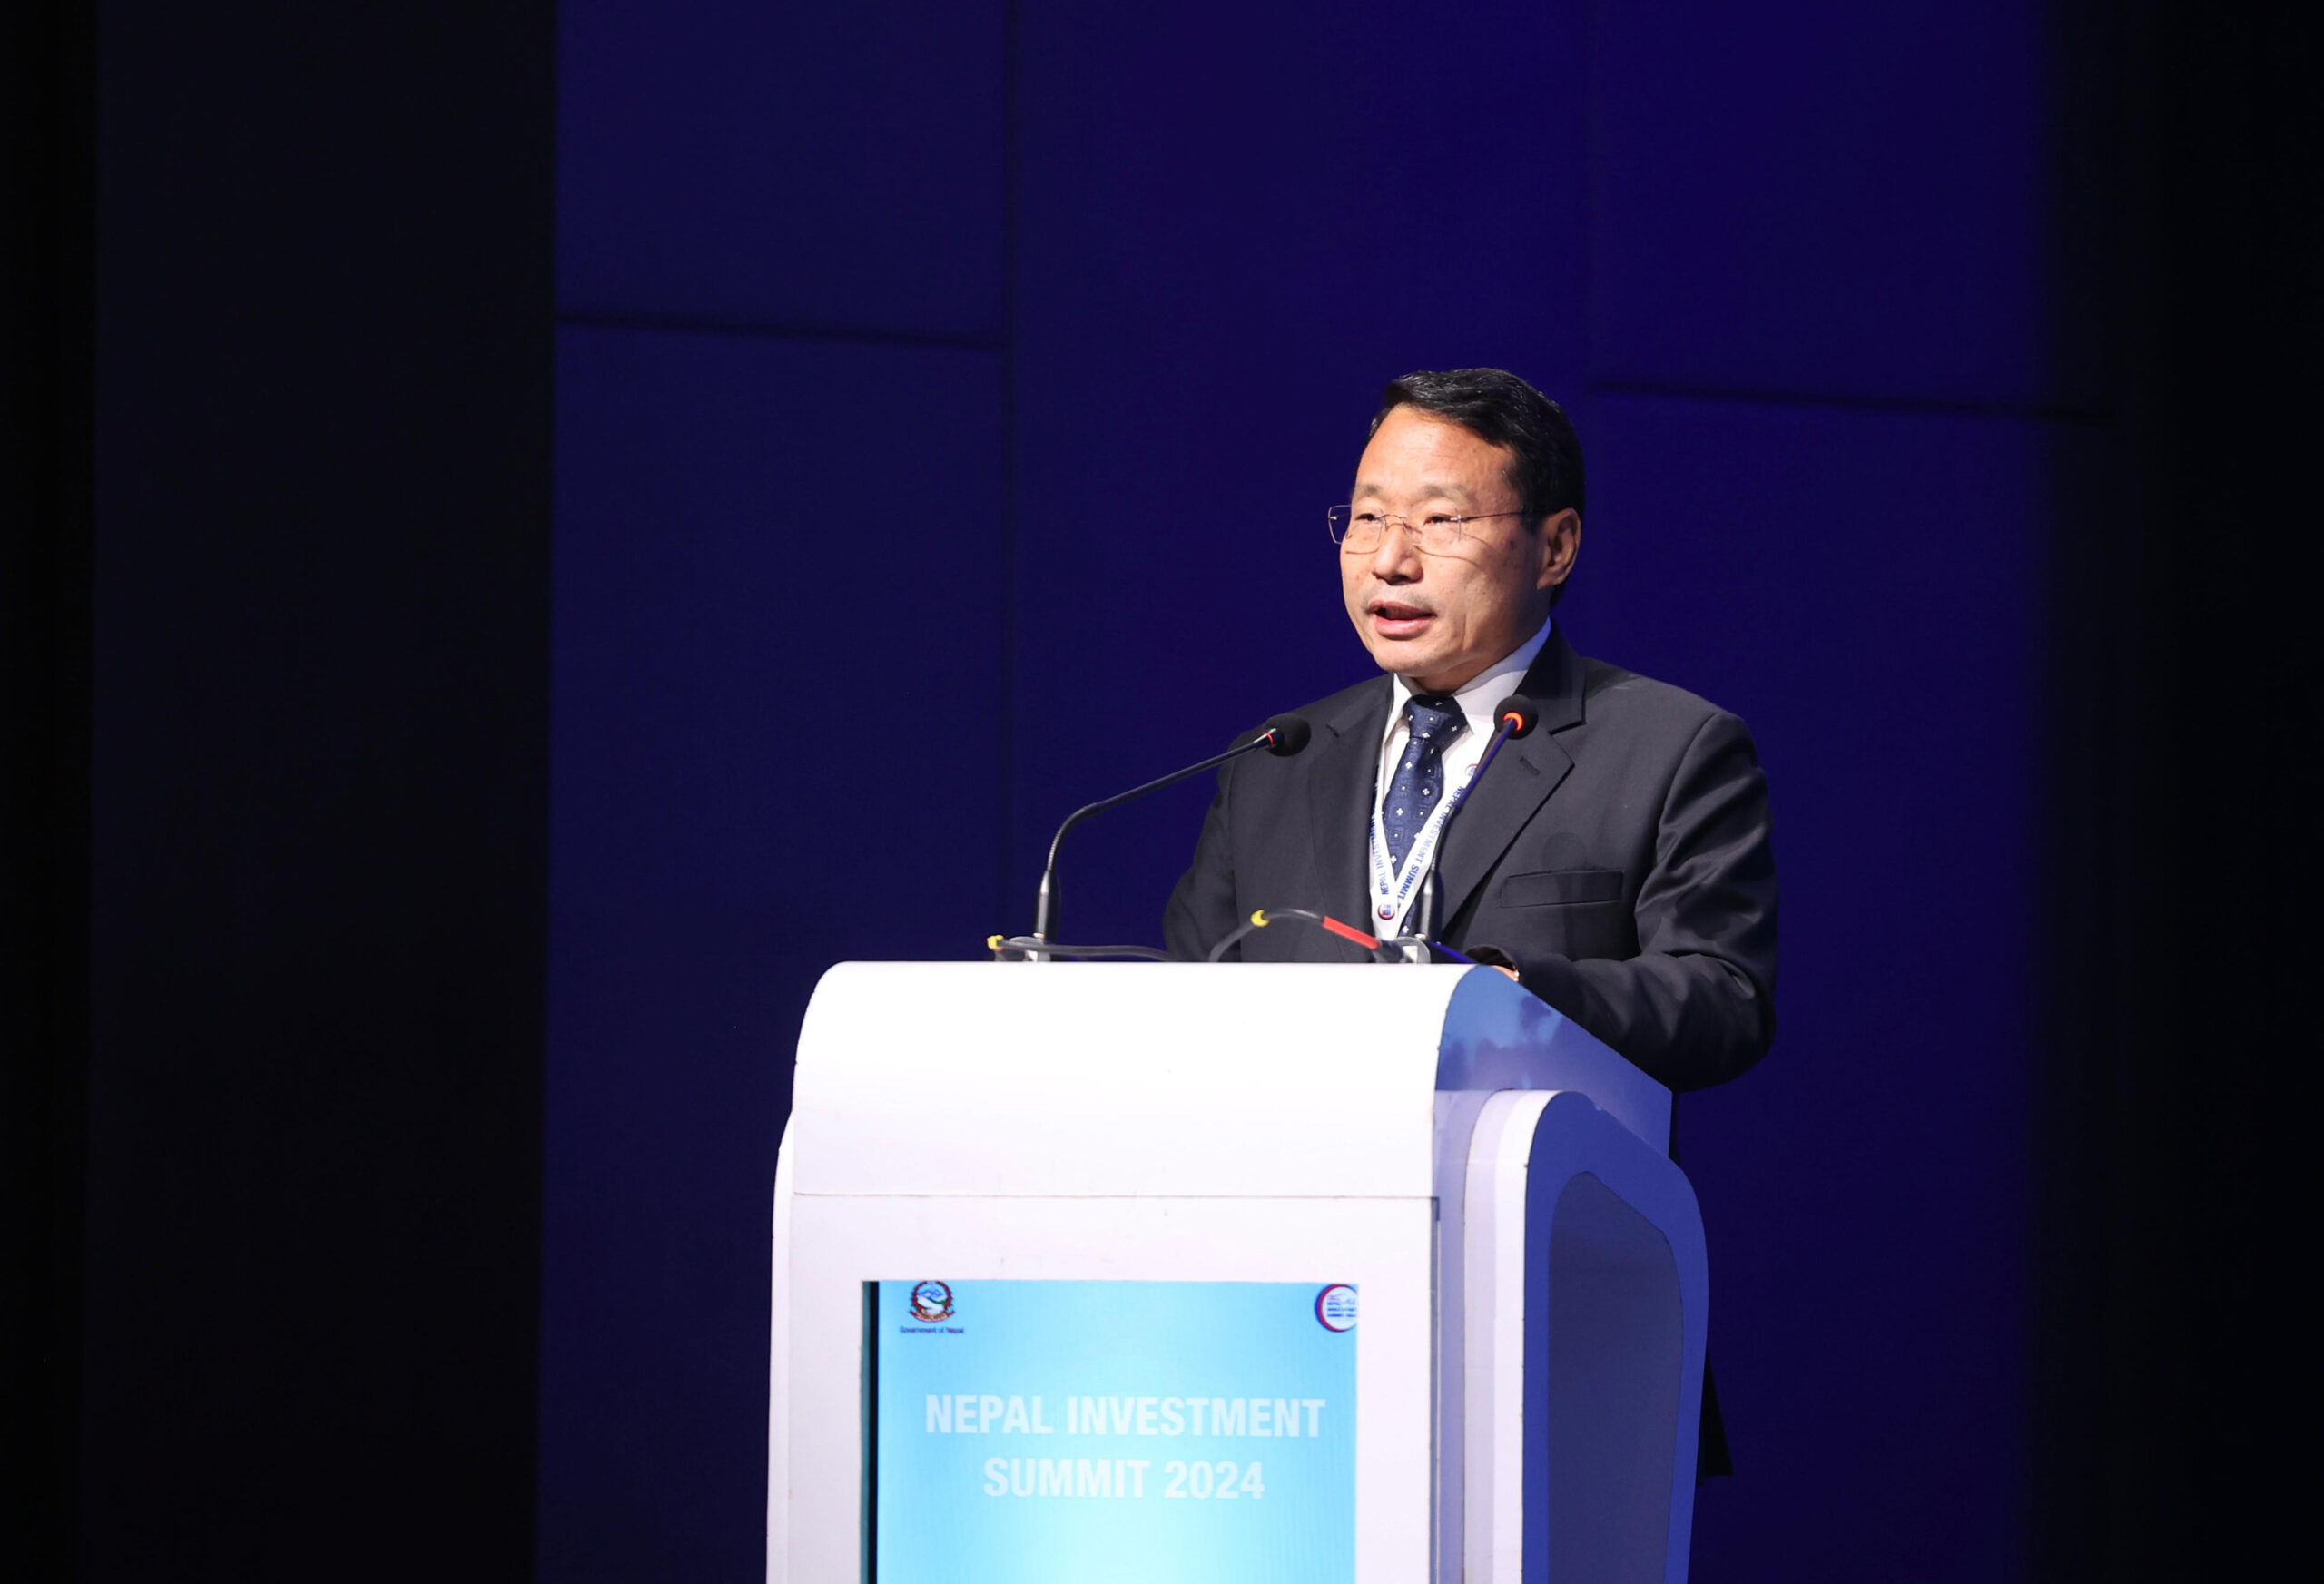 Investment Summit achieves grand success: Minister Pun